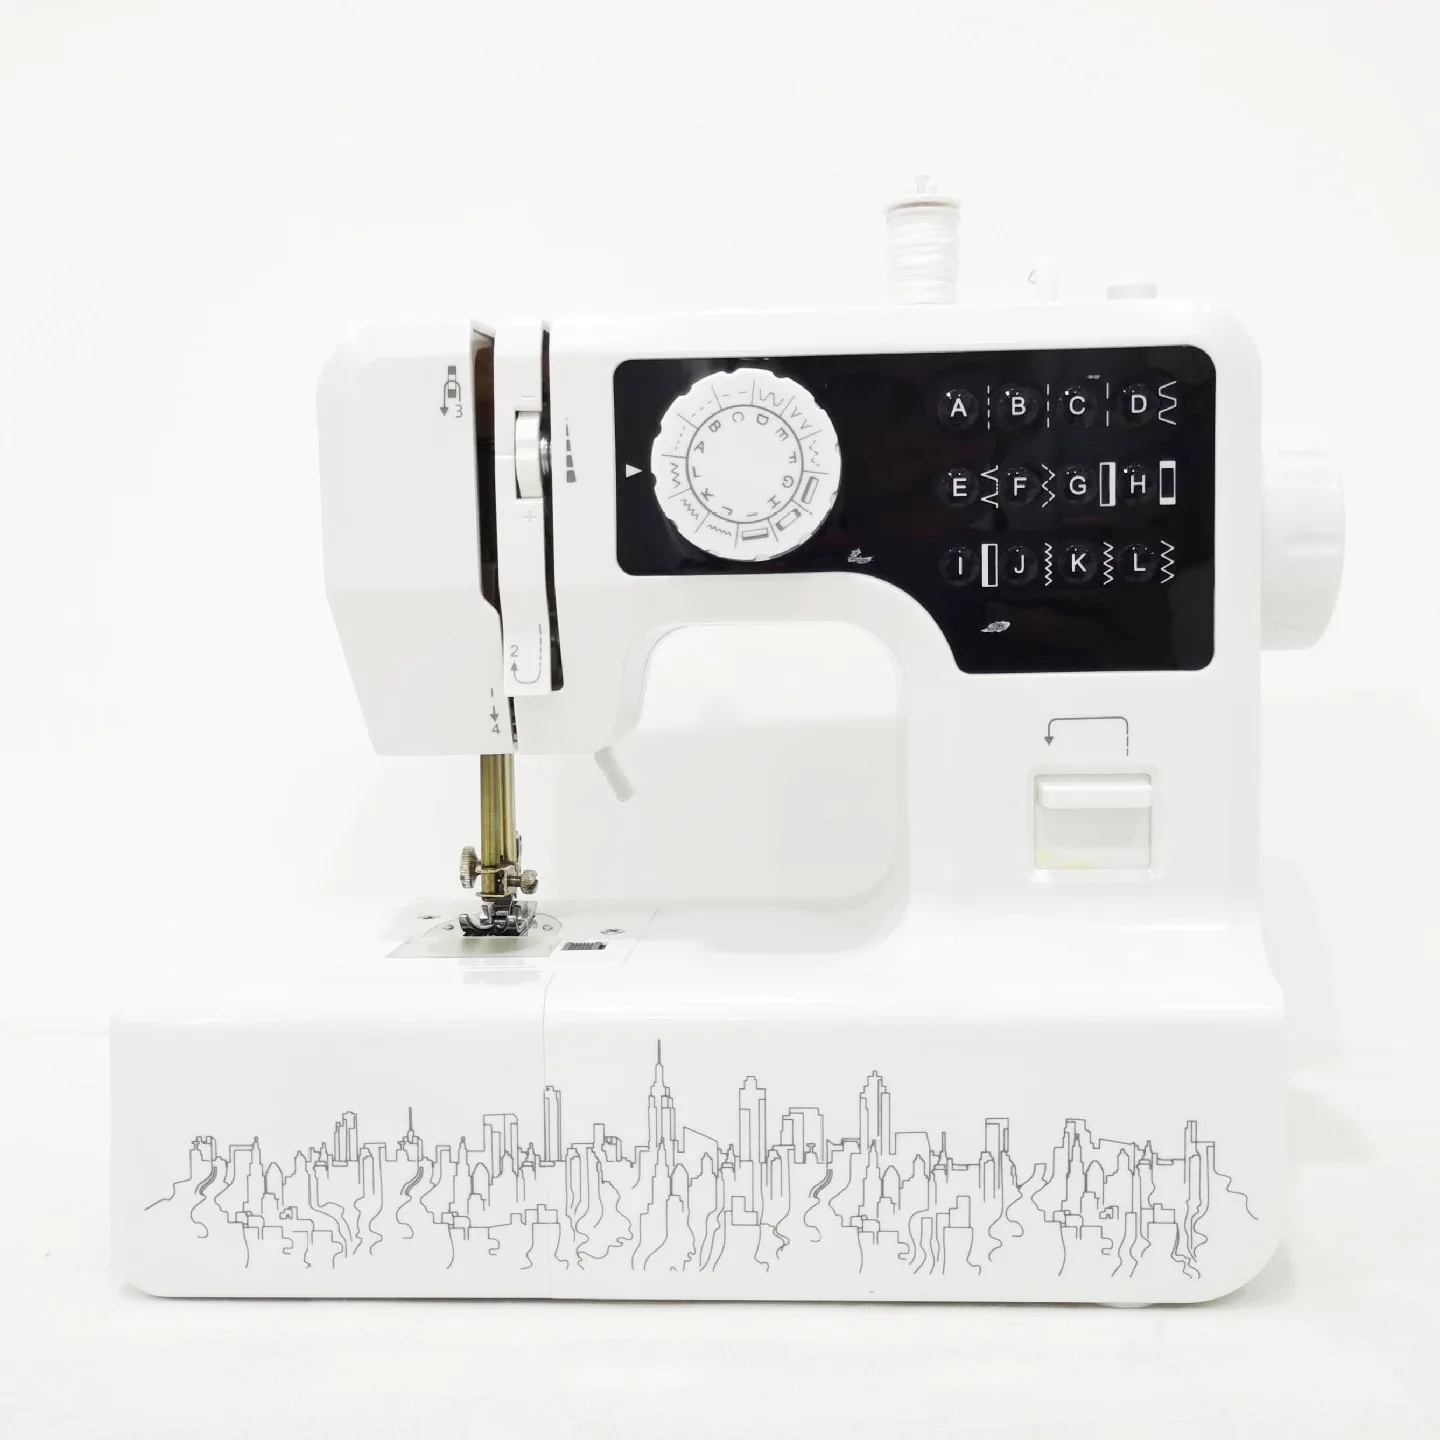 Household Sewing Machine Portable Electric Power Tool Set with Lamp Embroidery Motor Controller | Дом и сад